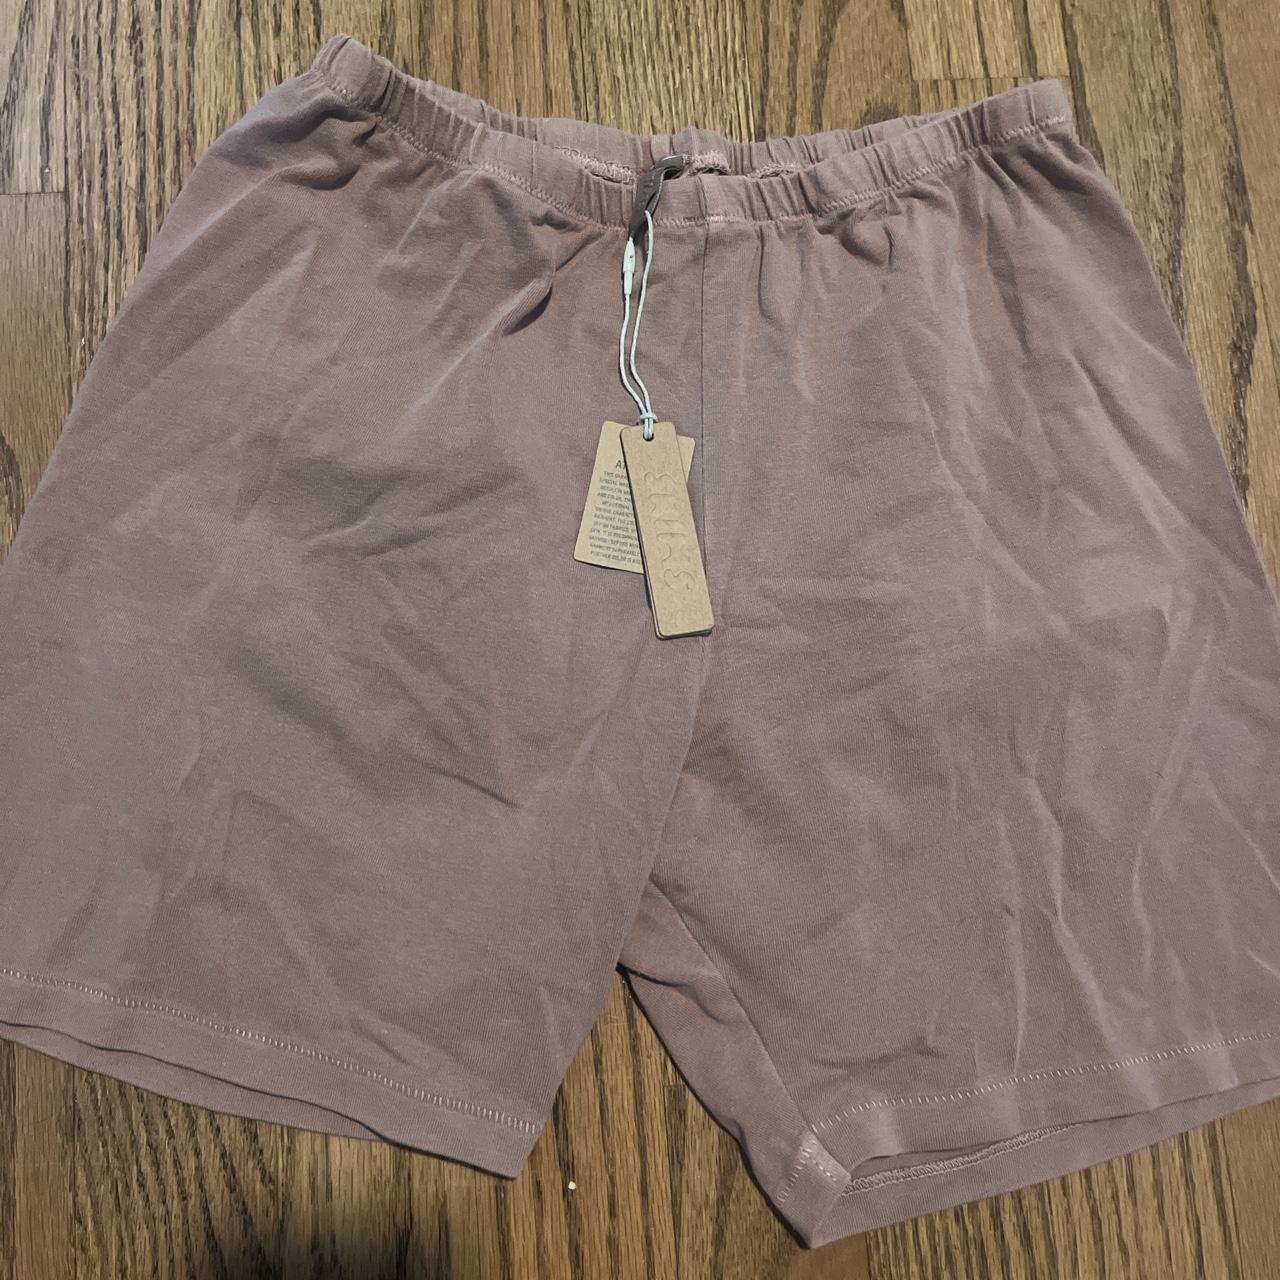 Skims soft lounge boxer shorts Size small limited - Depop